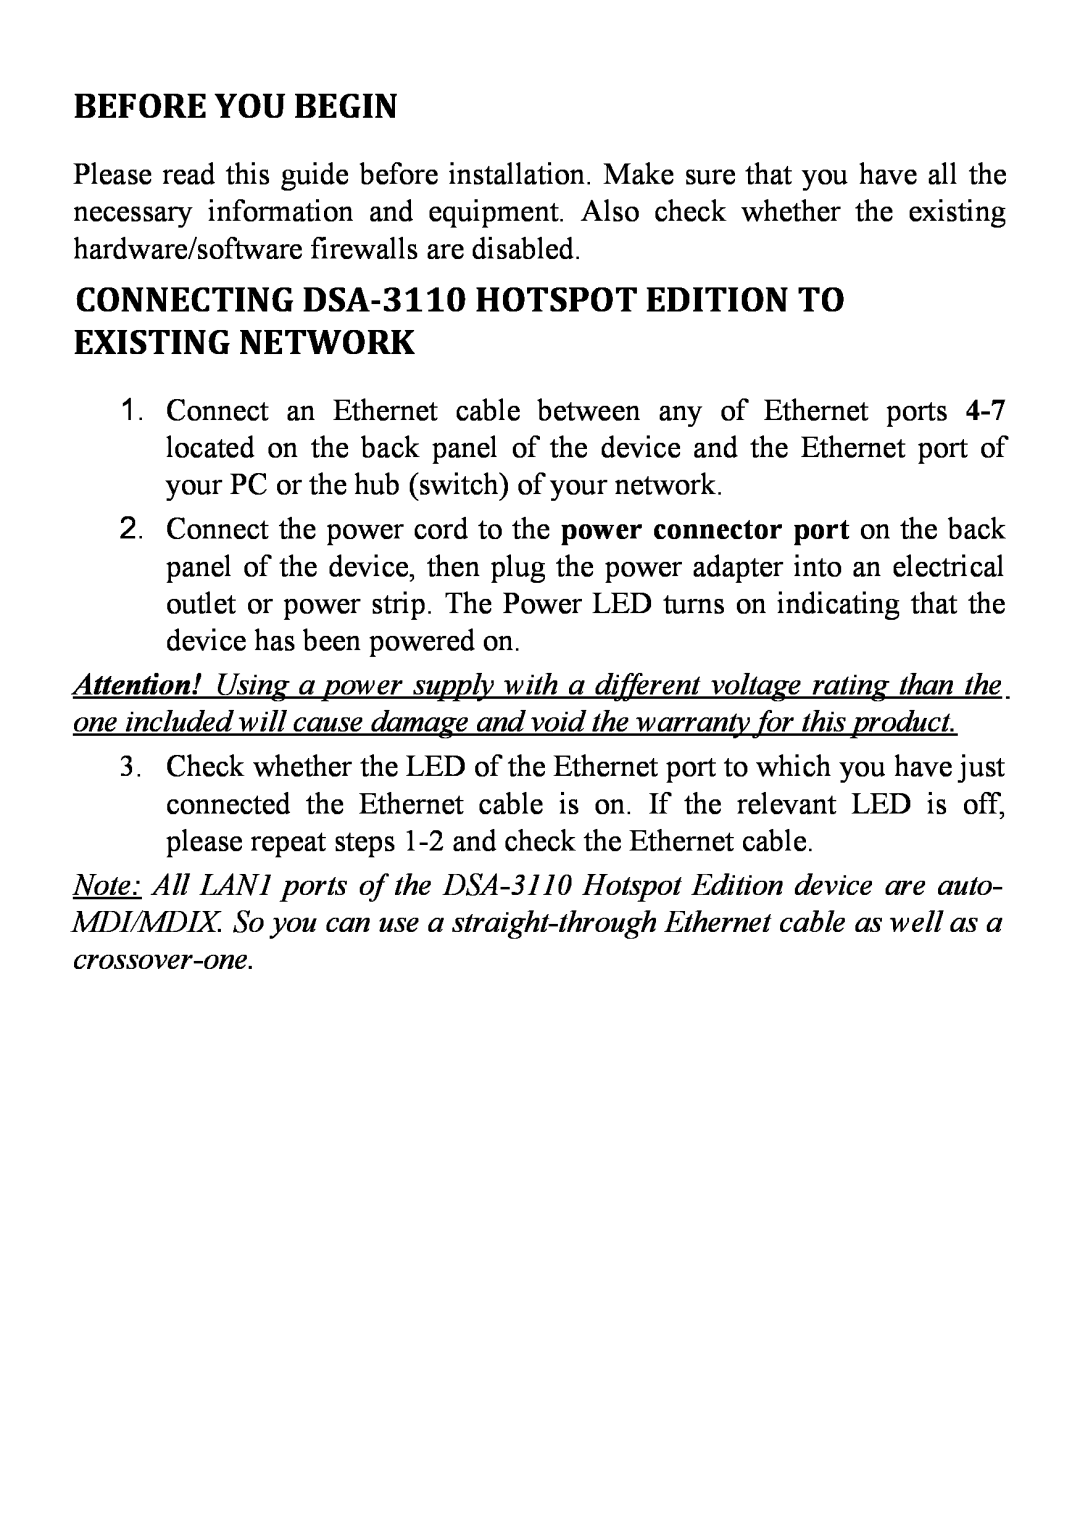 D-Link manual Before You Begin, CONNECTING DSA-3110 HOTSPOT EDITION TO EXISTING NETWORK 